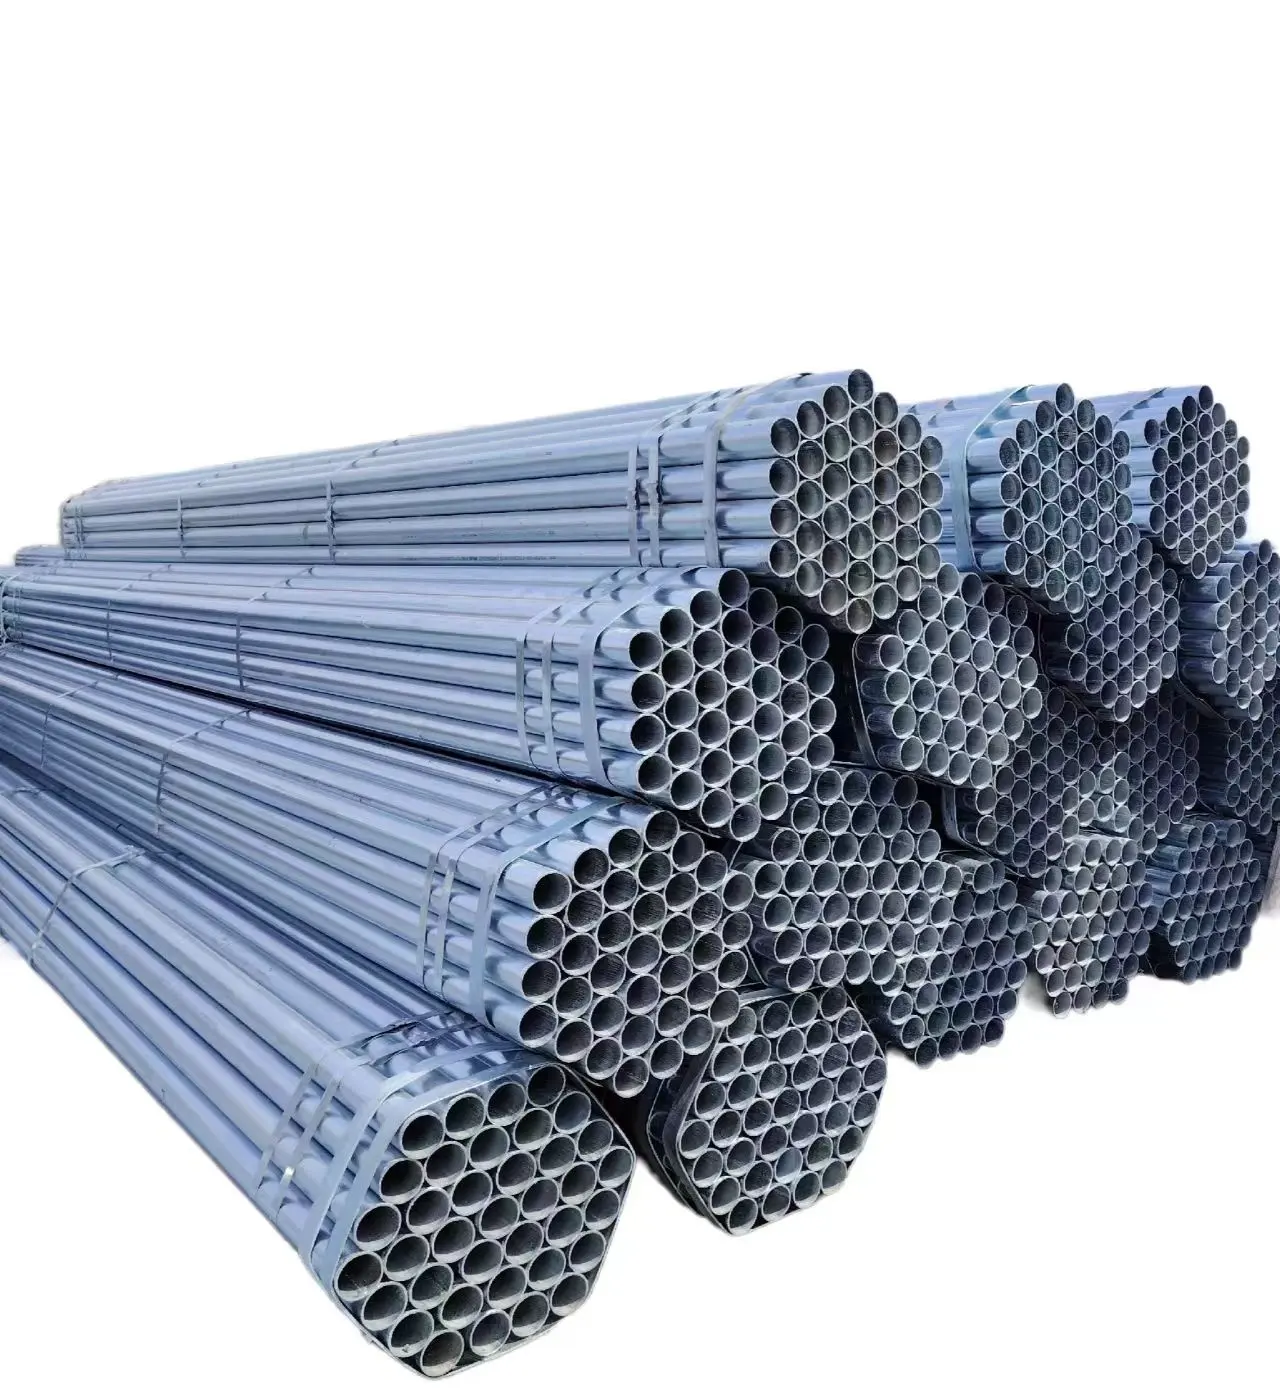 Factory Sales Hot Rolled Seamless Steel Pipe Carbon Steel Seamless Pipe Tube Seamless Steel Pipe